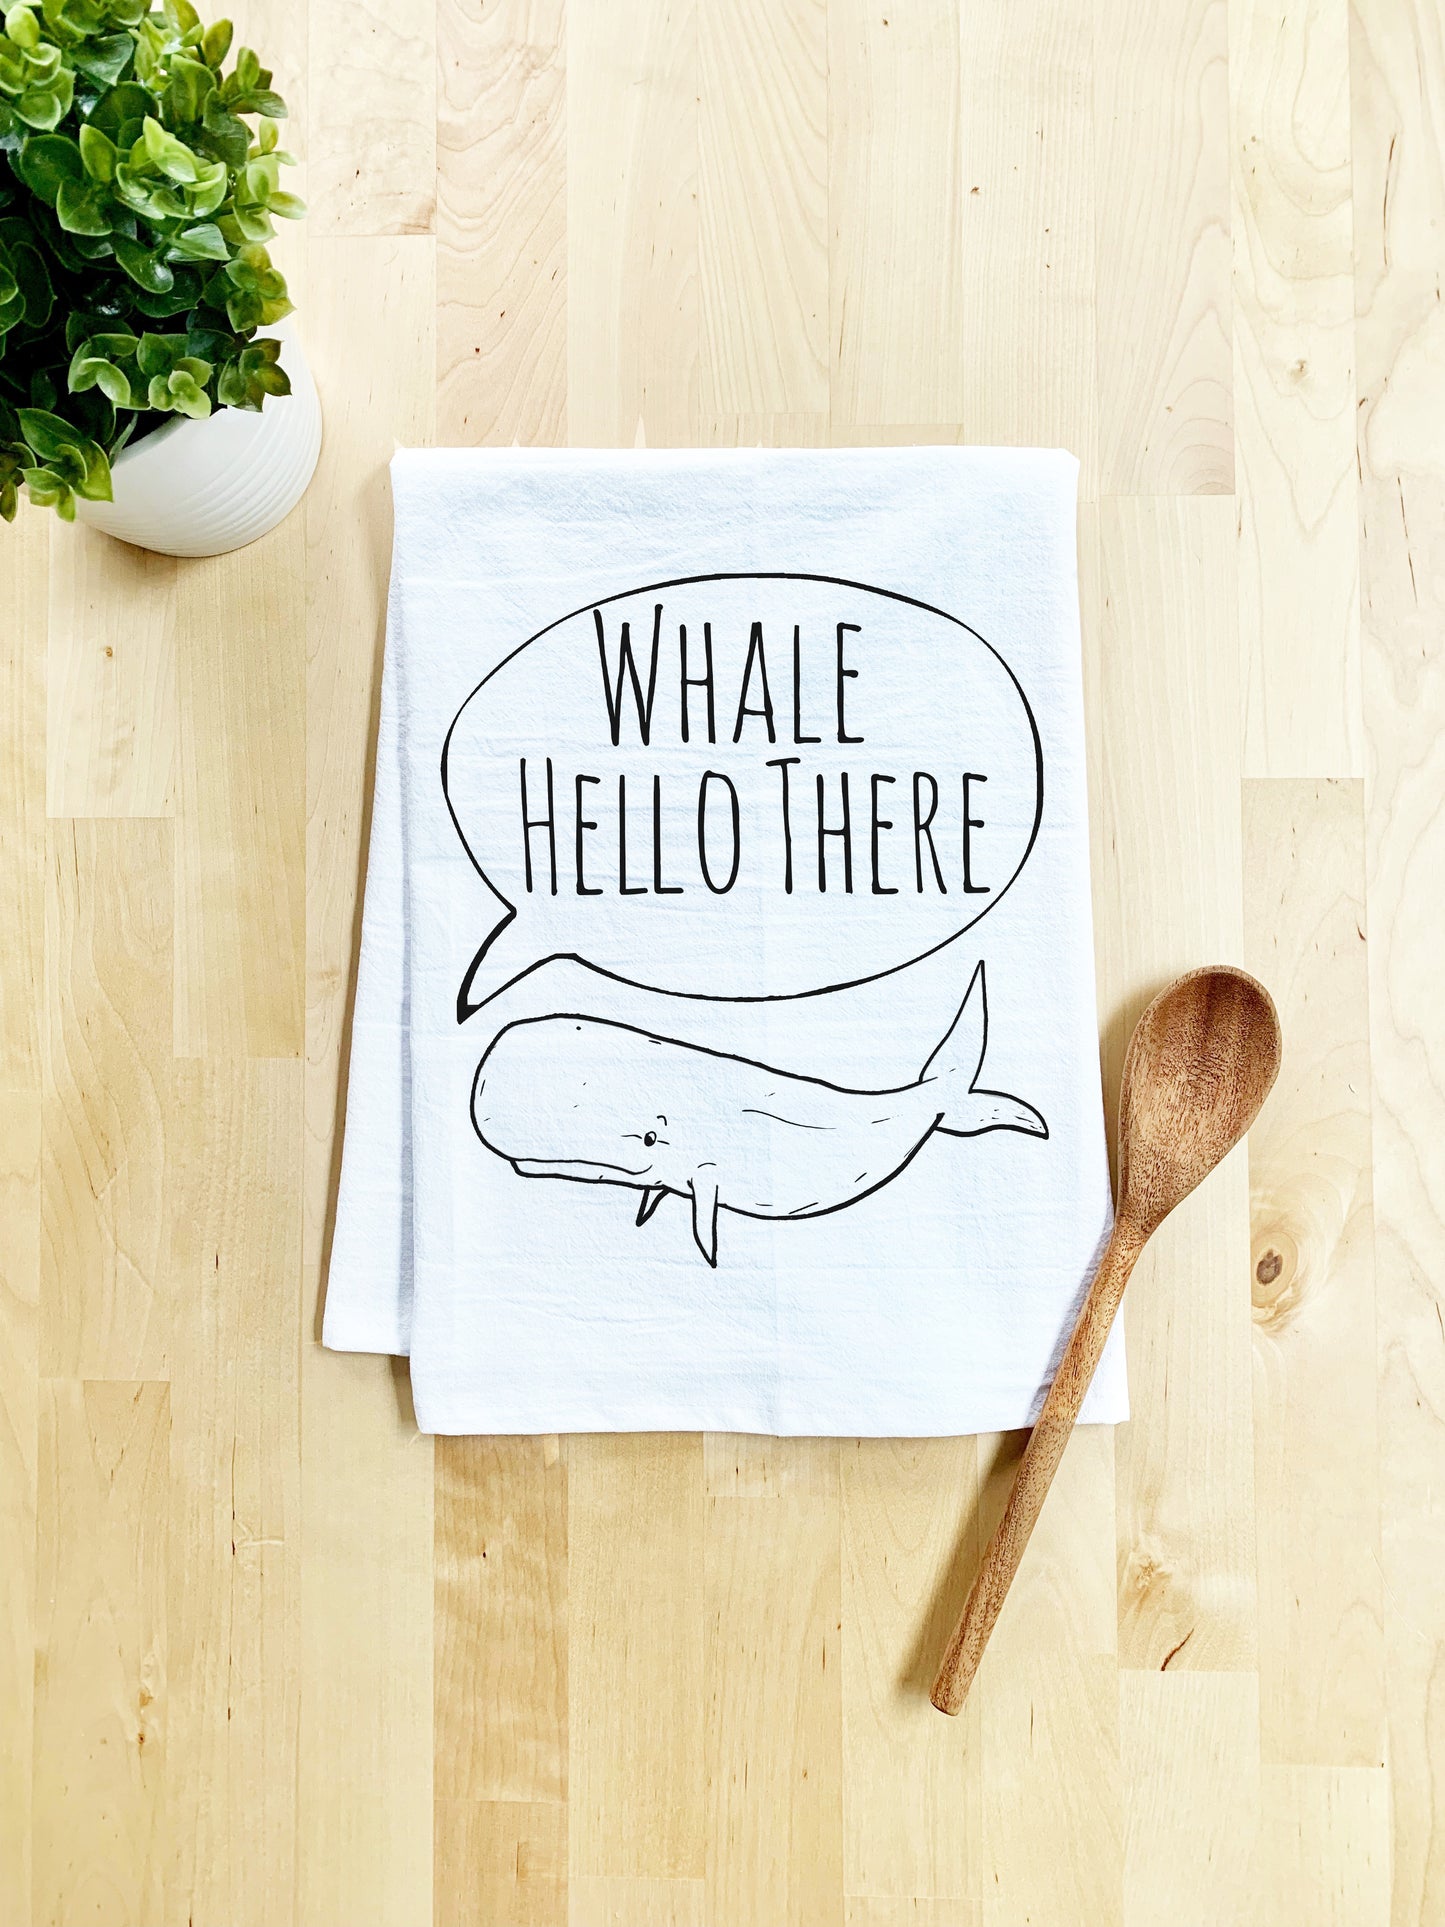 Whale Hello There Dish Towel - White Or Gray - MoonlightMakers